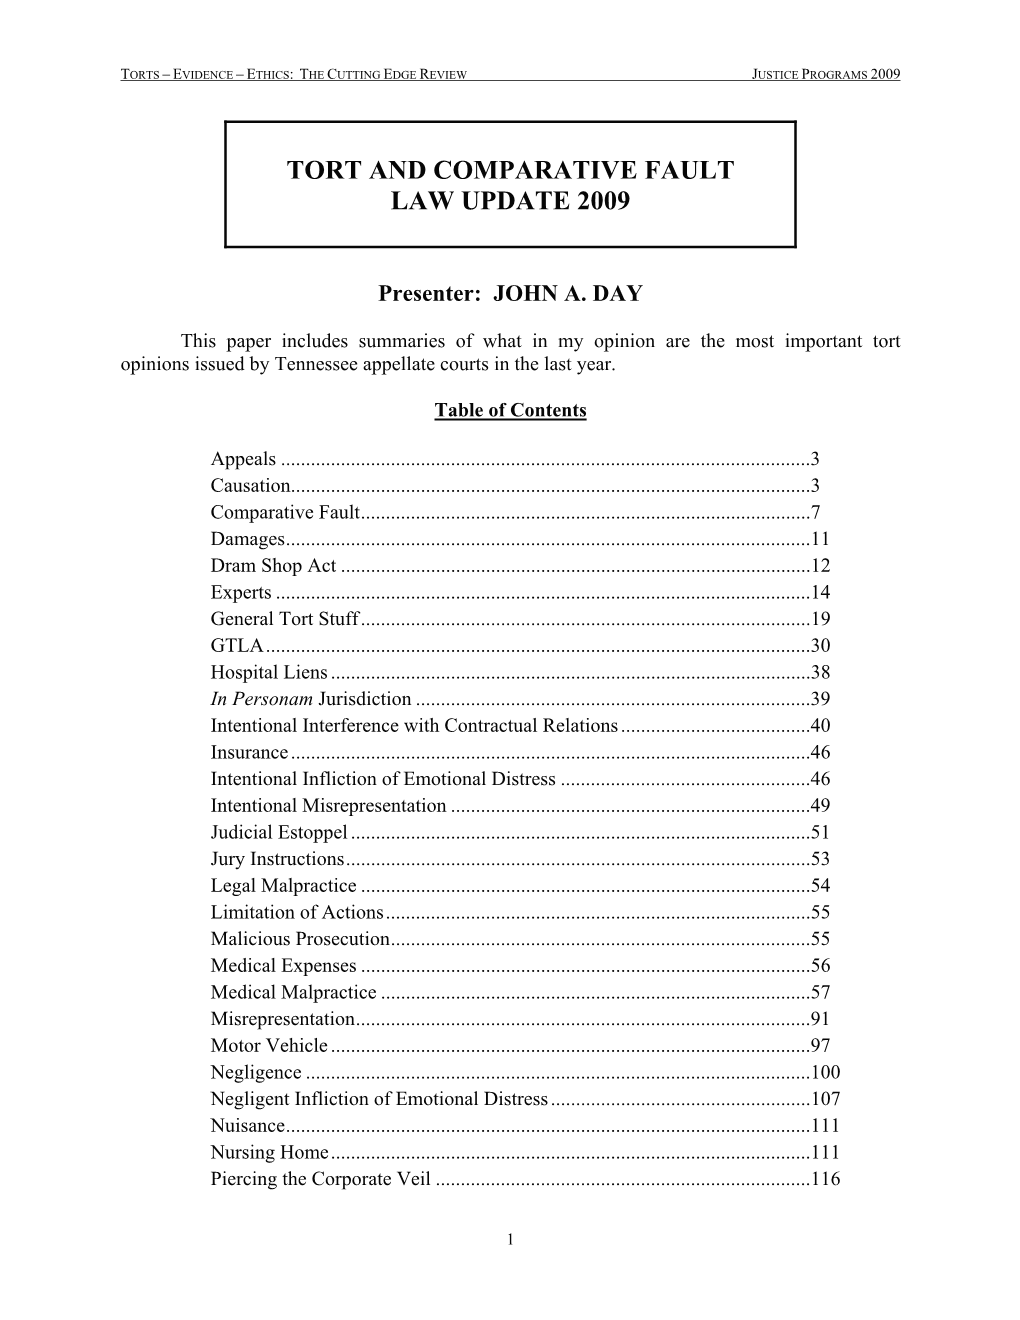 Tort and Comparative Fault Law Update 2009